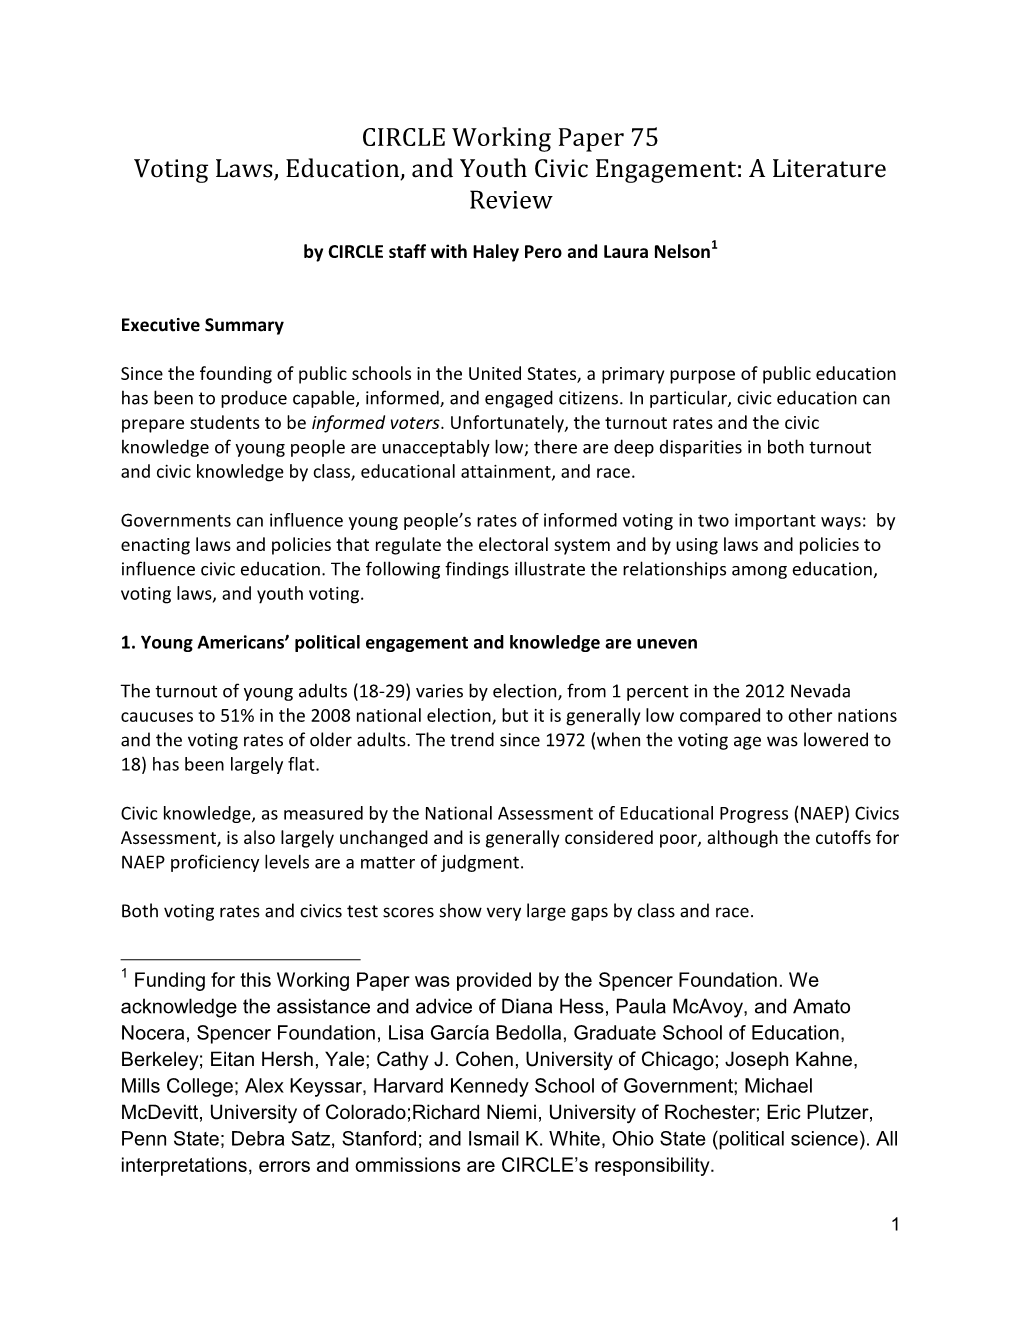 Voting Laws, Education, and Youth Civic Engagement: a Literature Review